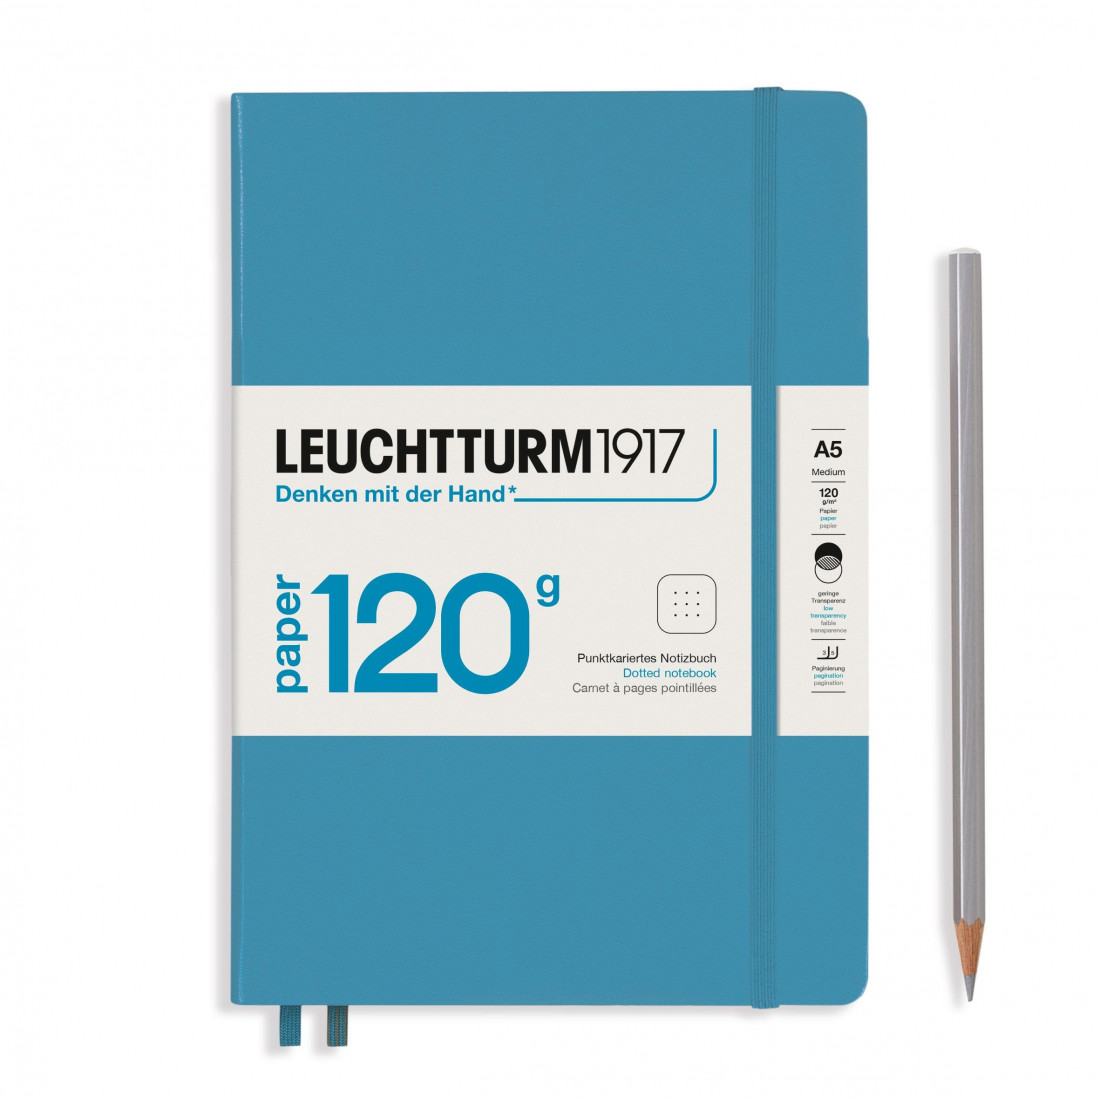 Leuchtturm 1917 Notebook A5 Edition 120g Nordic Blue Dotted Hard Cover